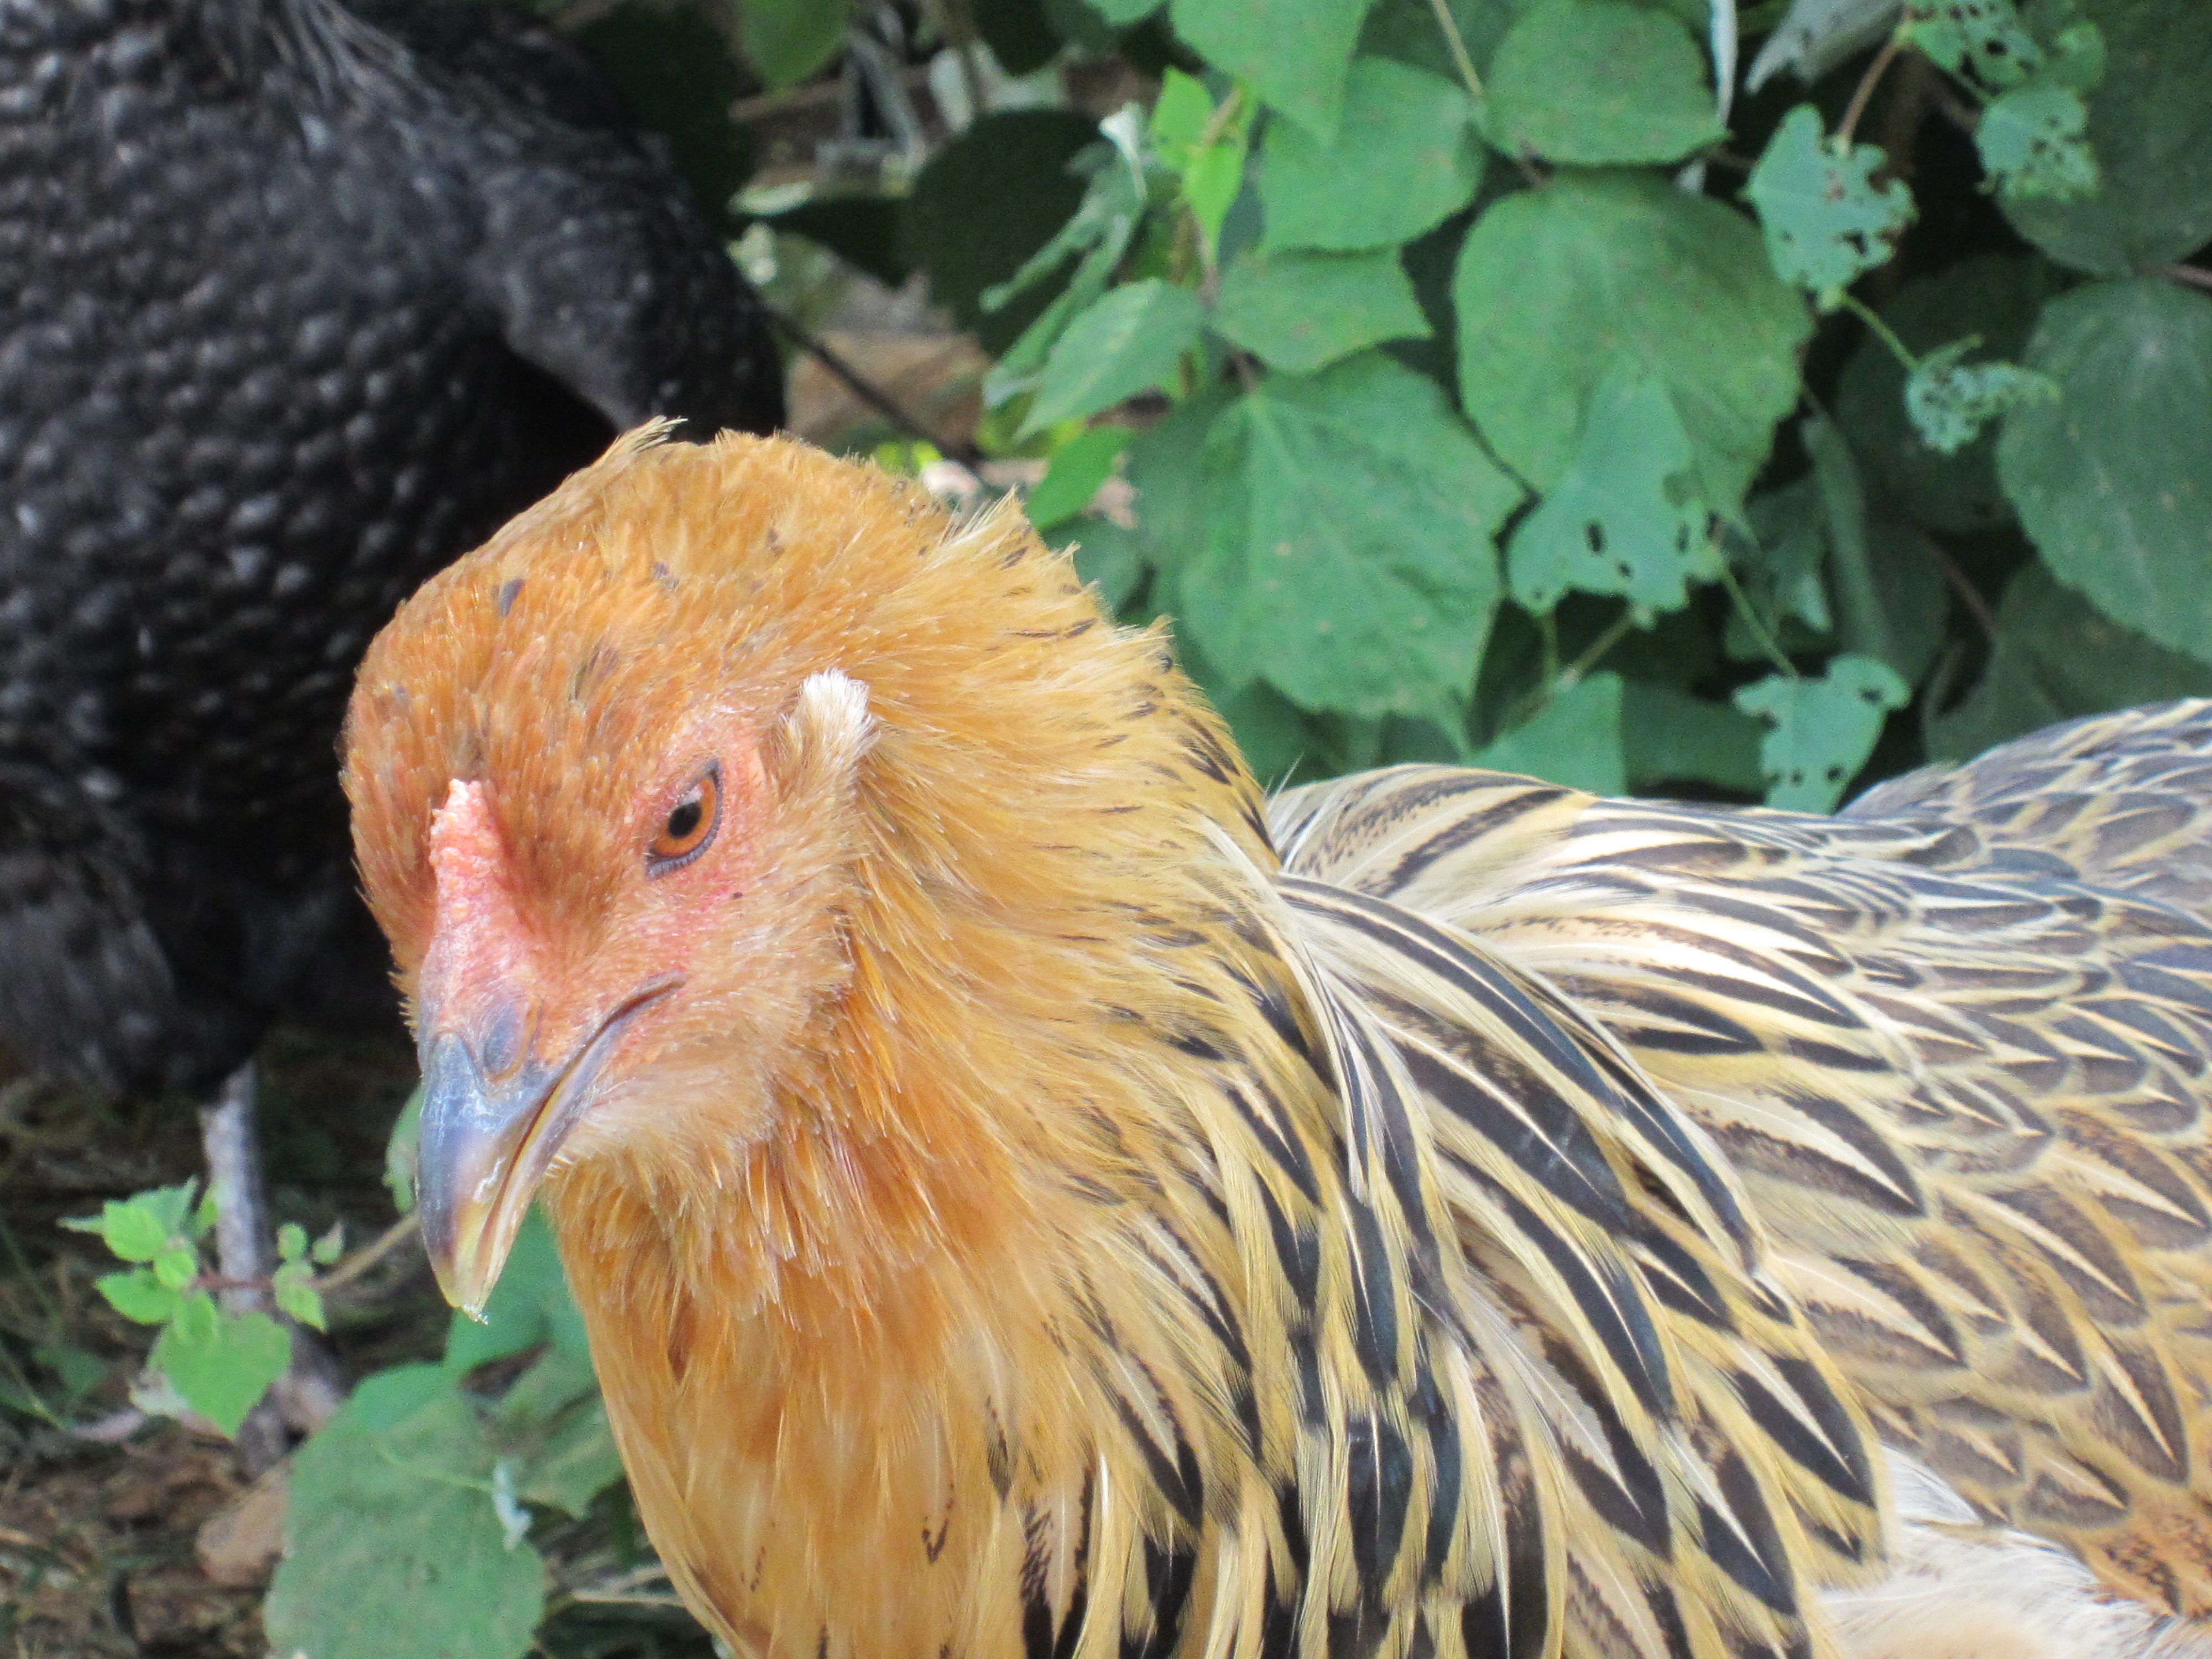 Lindsey, an Americauna hen. She is very beautiful, a nice shiny gold with soft brown/black feathers. She is probably the prettiest hen I've got.